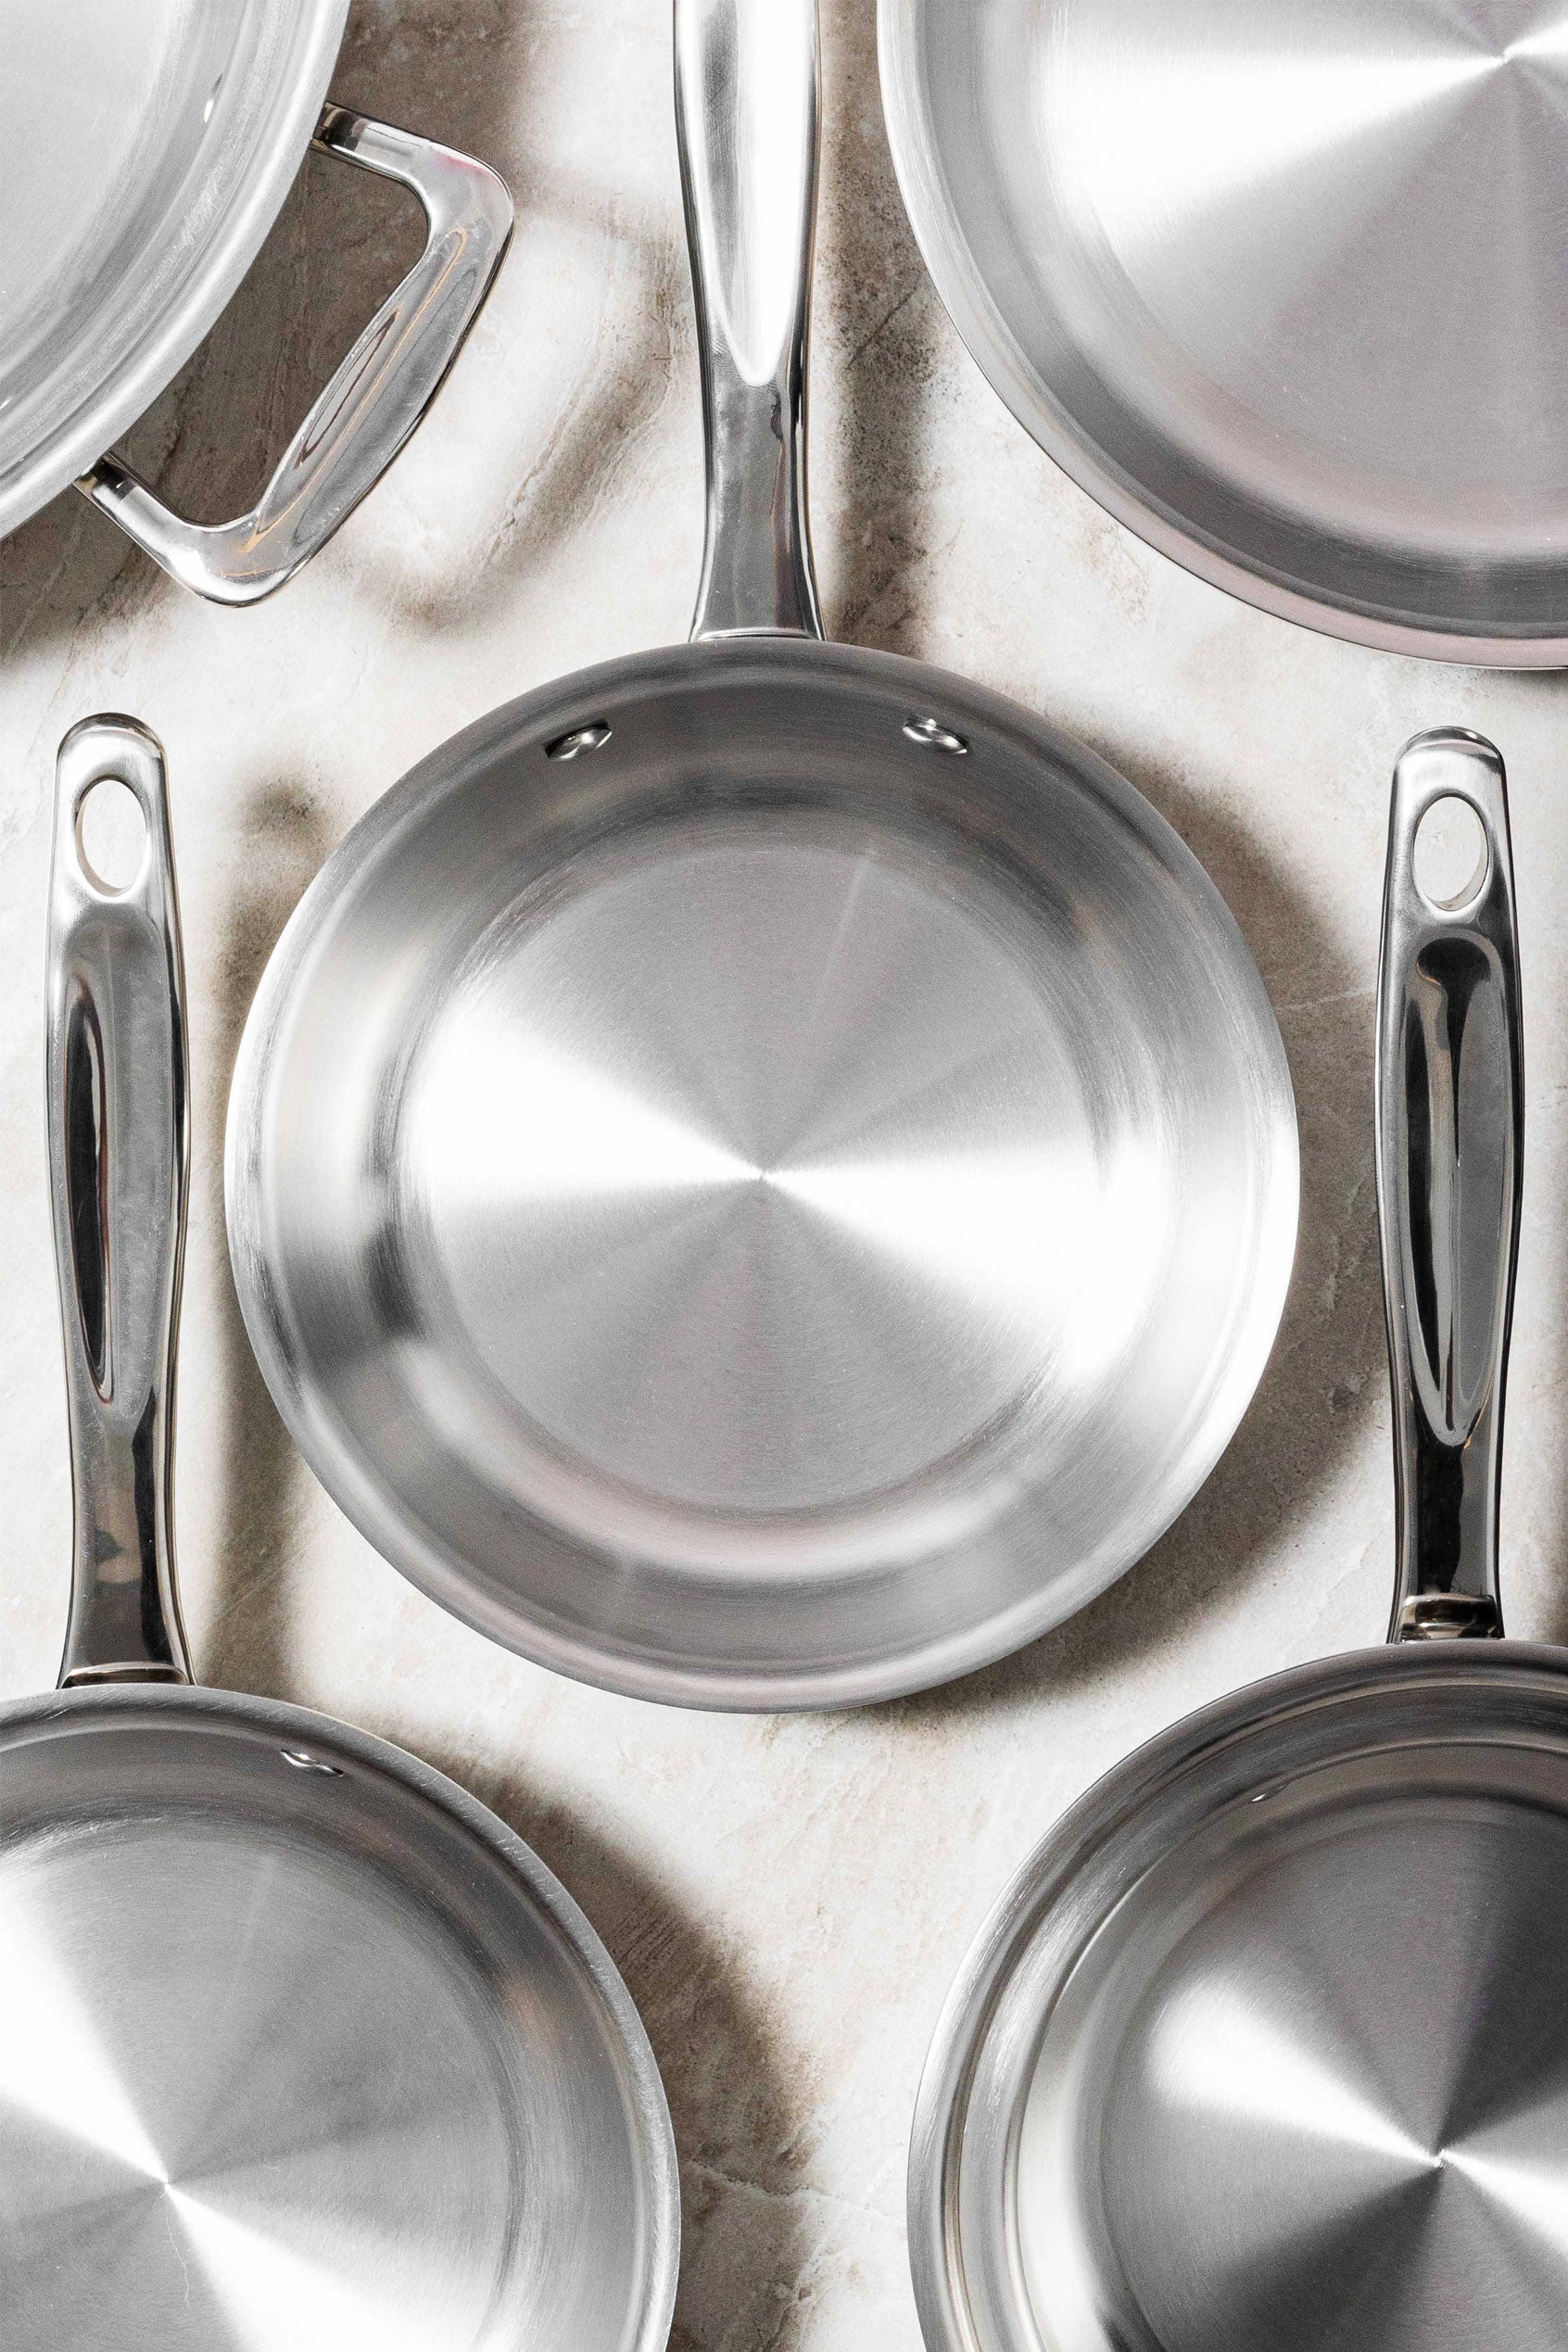 Cooking With Stainless Steel: What You Need To Know